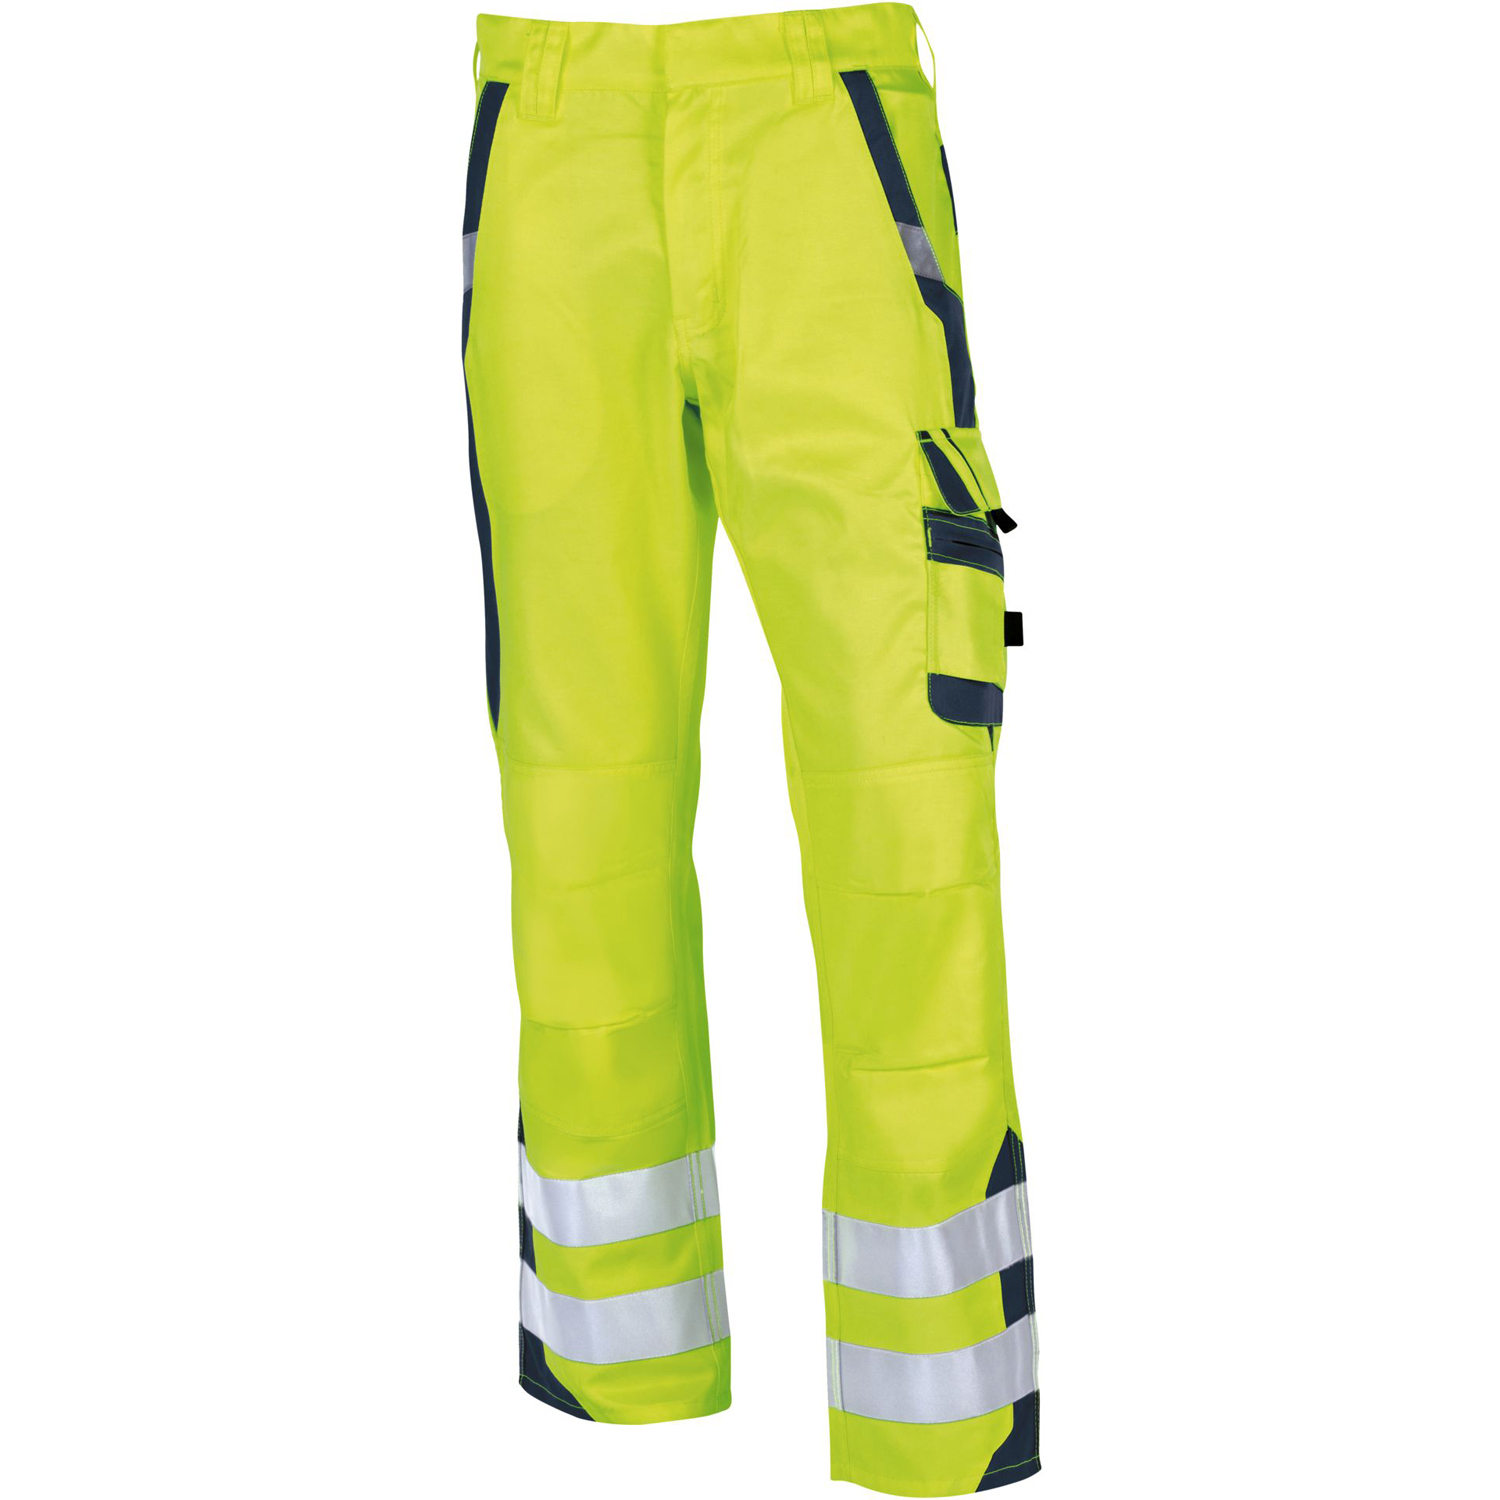 Working trousers in yellow by PKA Klöcker in large sizes 58-66